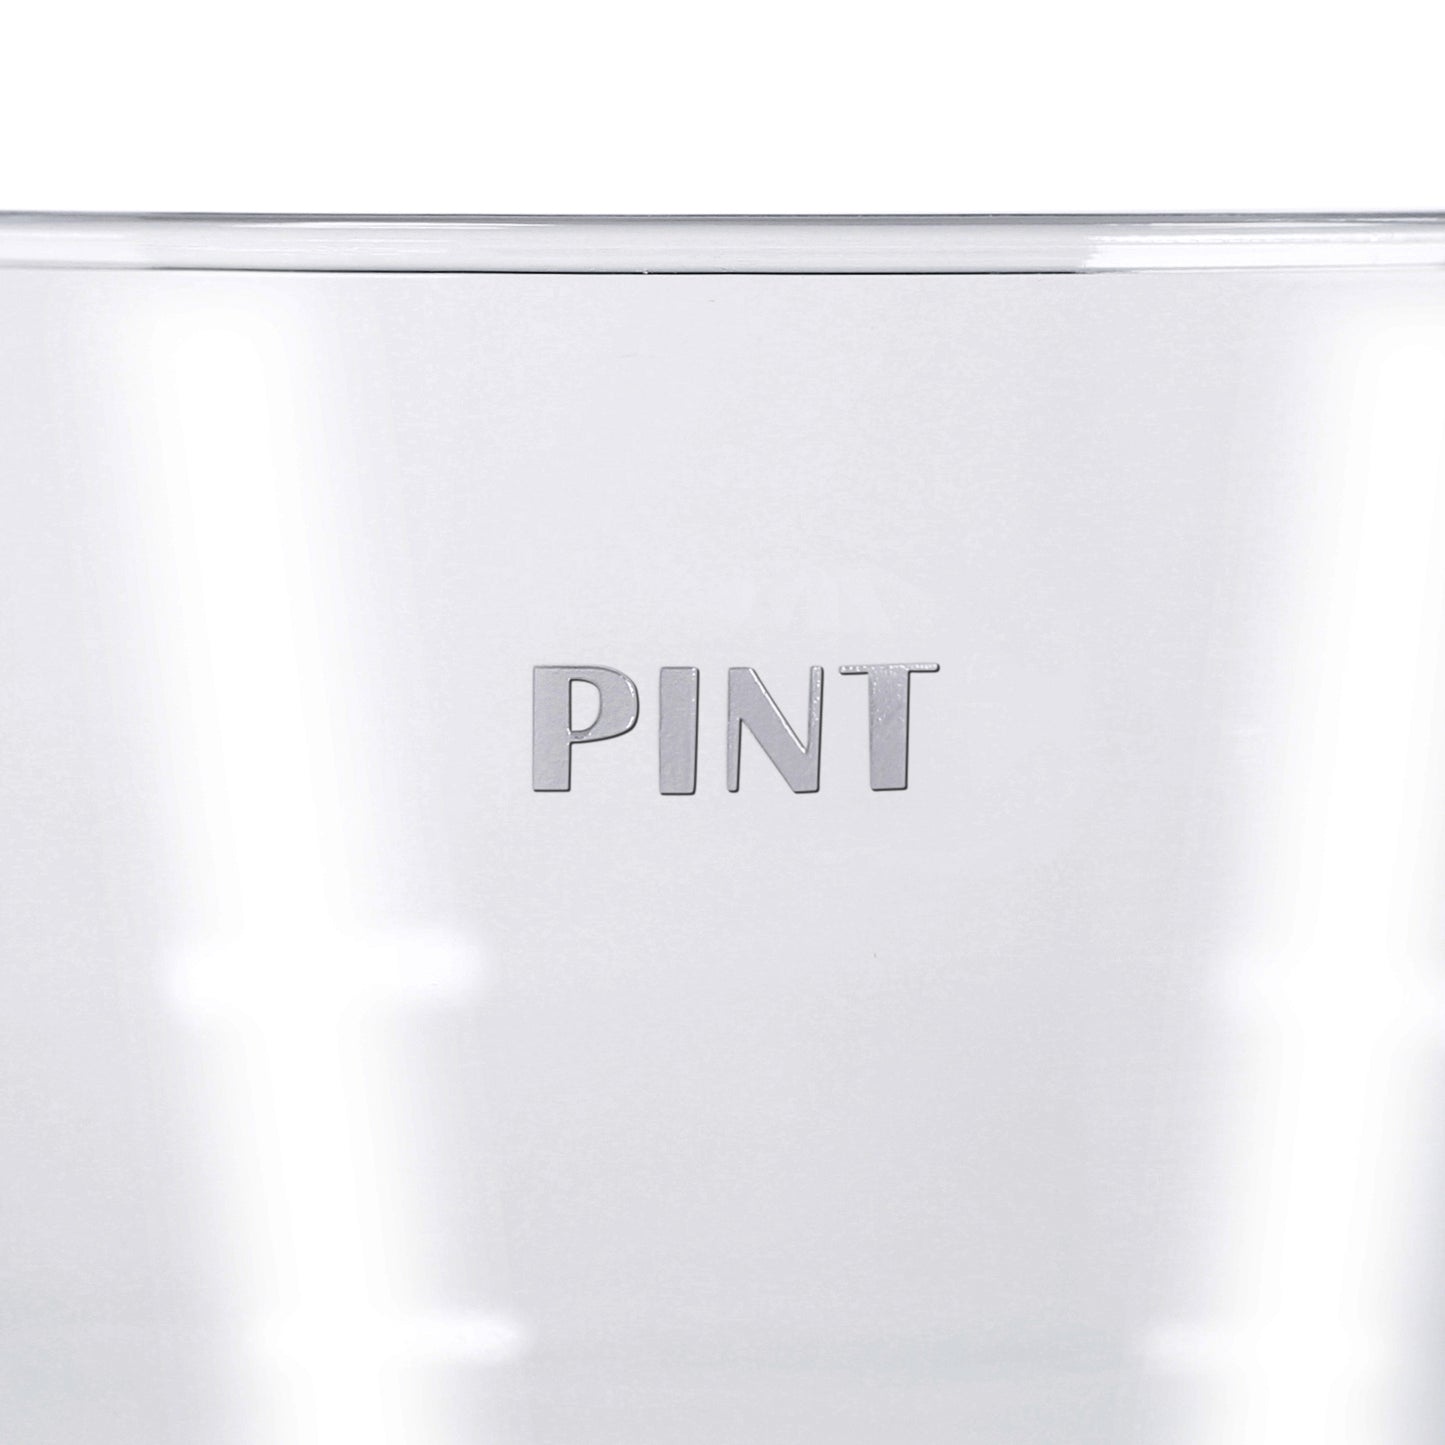 100 x Pint Glasses 568ml Transparent Clear Strong Reusable Plastic CE Marked Beer Cider Lager Drinks Stackable Dishwasher-5056020186076-EY-PP-075-Product Pro-Clear, Pint, Pint Glasses, Plastic Pint Glasses